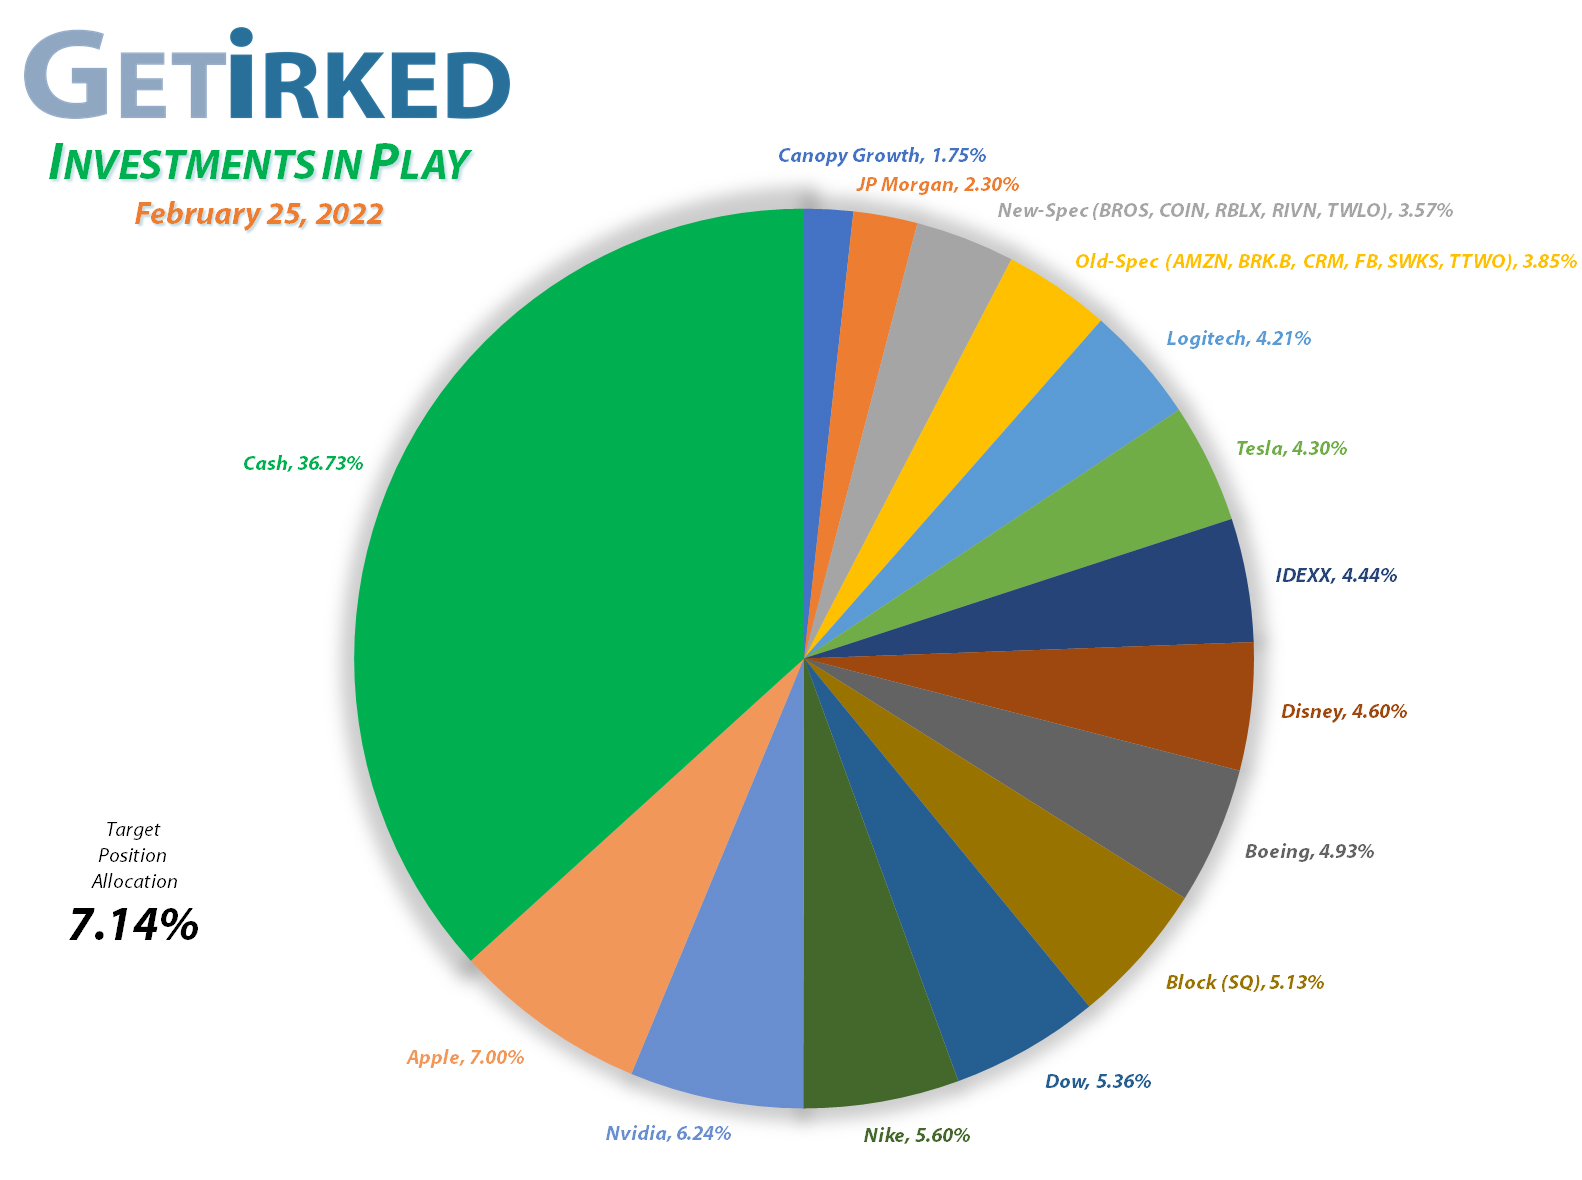 Get Irked - Investments in Play - Current Holdings - March 12, 2021et Irked's Pandemic Portfolio Holdings as of February 25, 2022